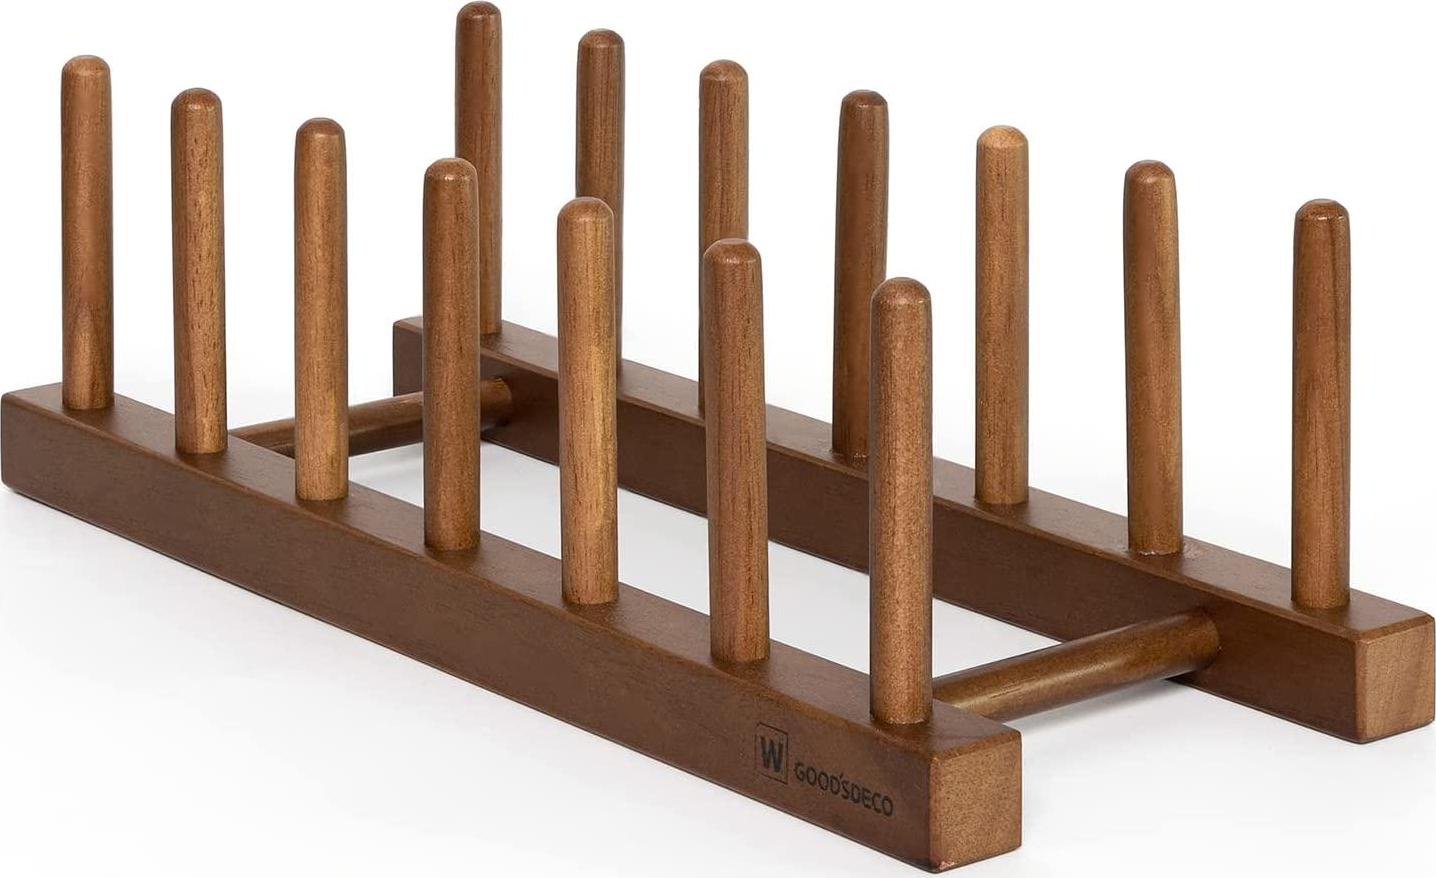 GOODSDECO, Goodsdeco Wooden Dish Rack - Dish Drying Rack for Dish Cup Bowl Cutting Board, Drying Rack Stand Storage Holder, Kitchen Countertop Organizer (Large, Walnut)